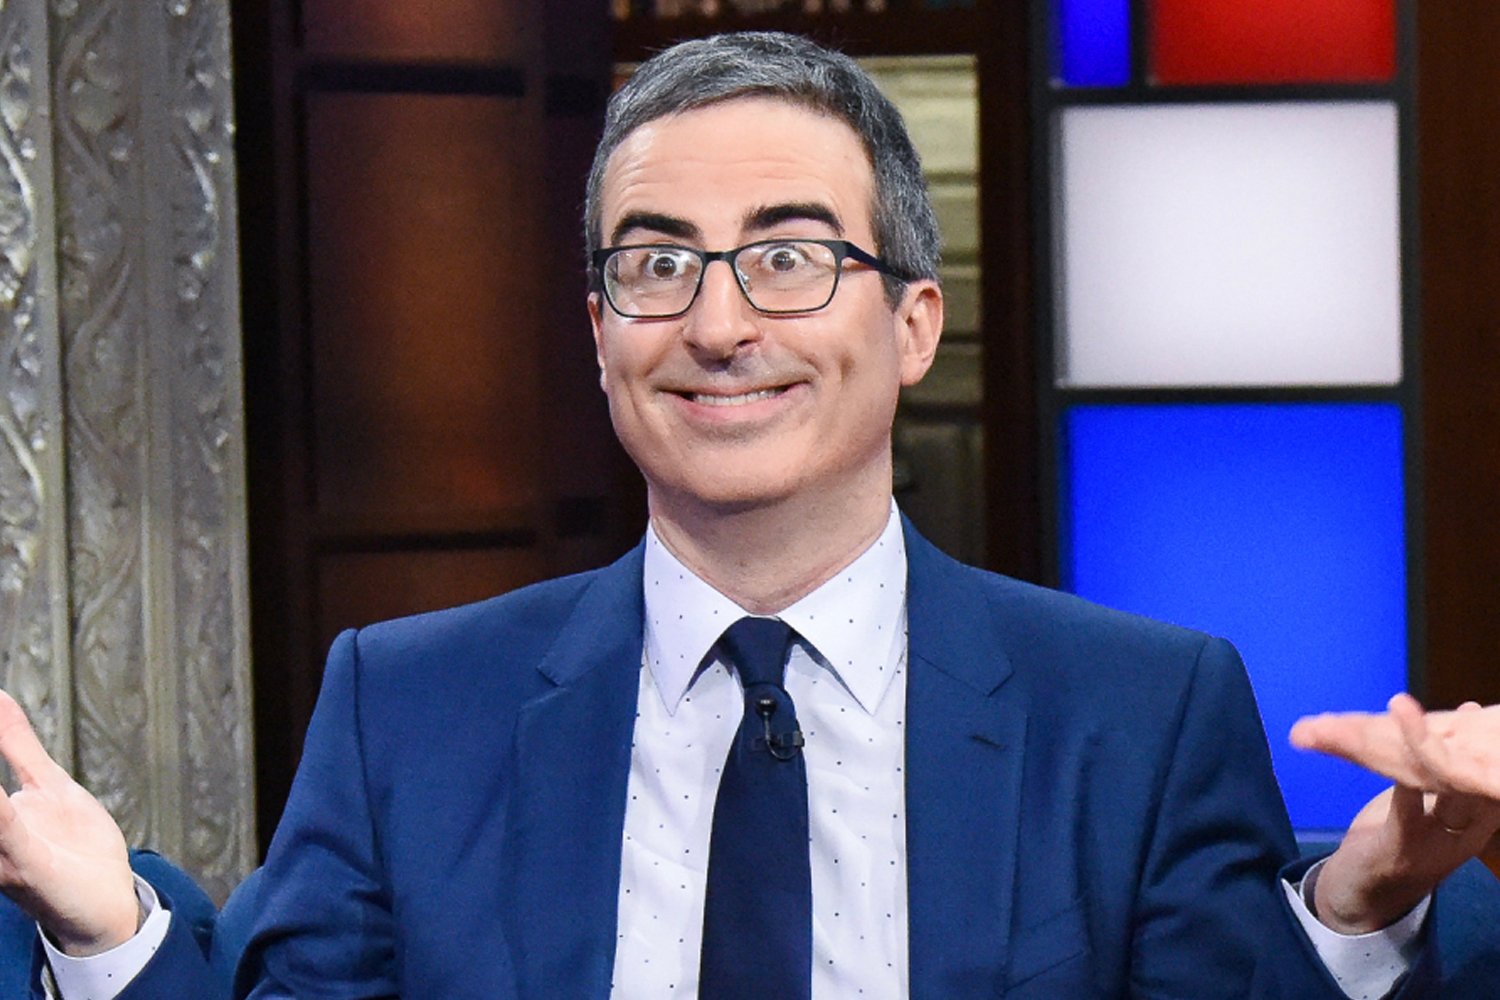 John Oliver on the set of 'The Late Show' in February 2020